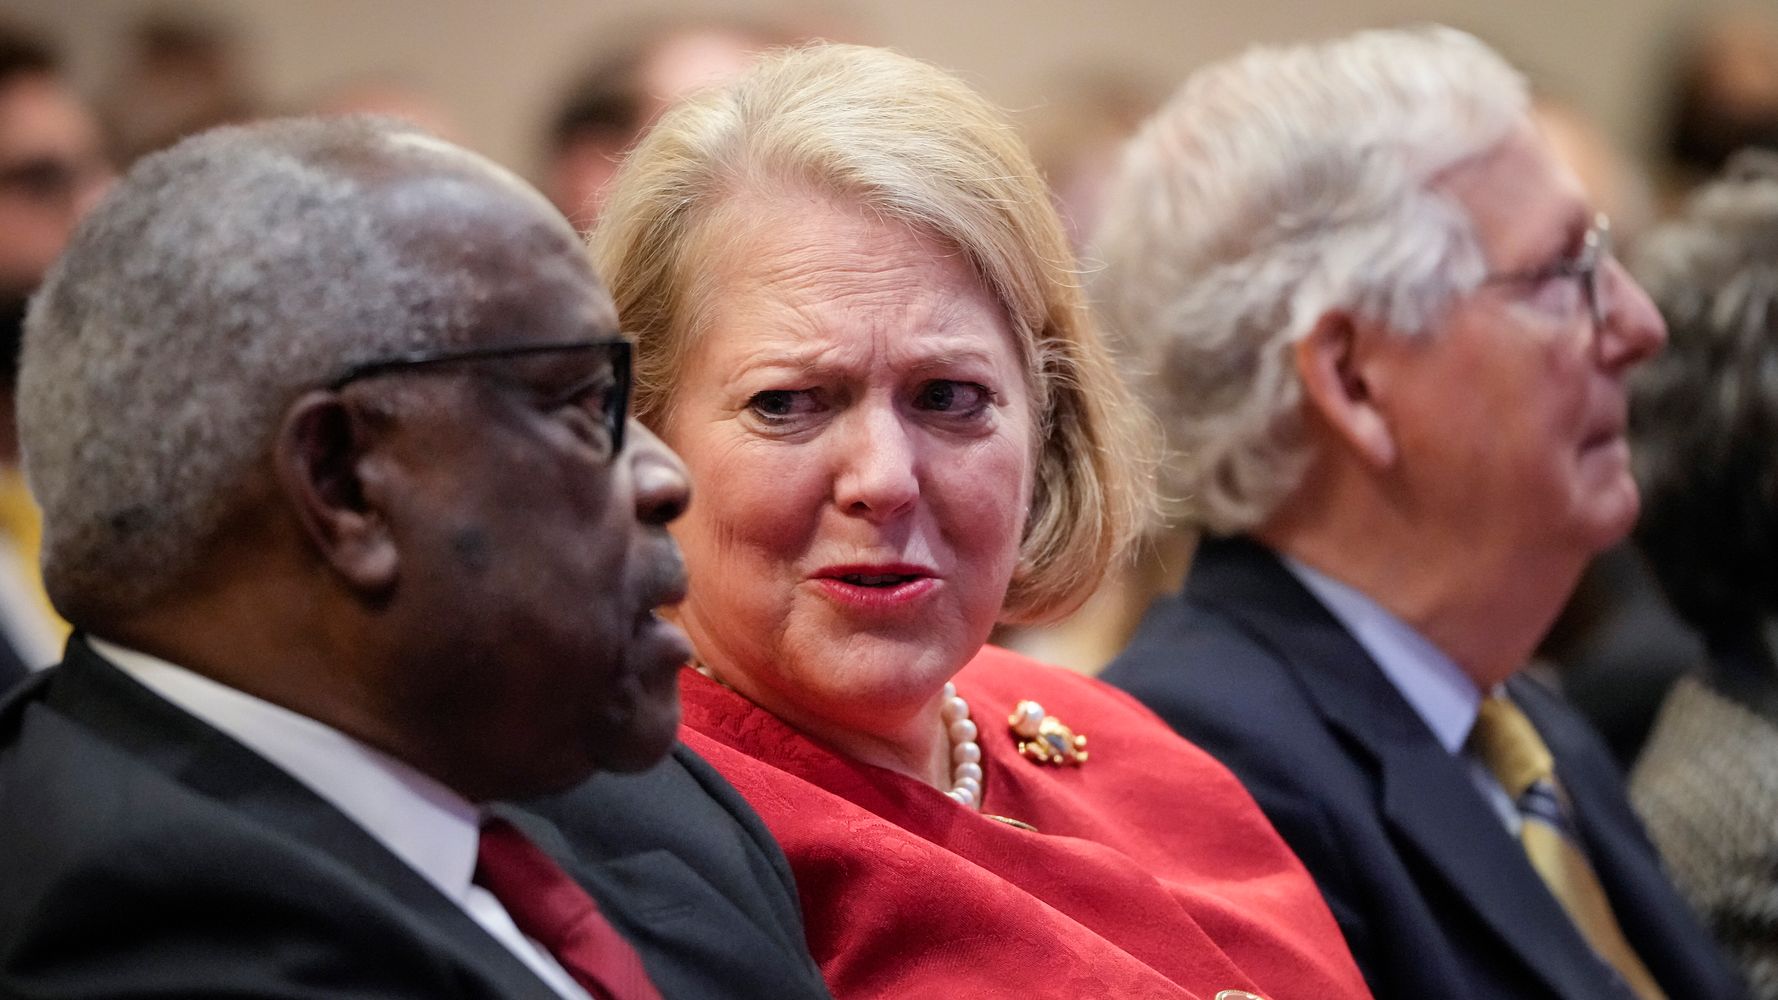 Ginni Thomas Exchanged Dozens Of Texts Urging Top Trump Aide To Overturn 2020 Election